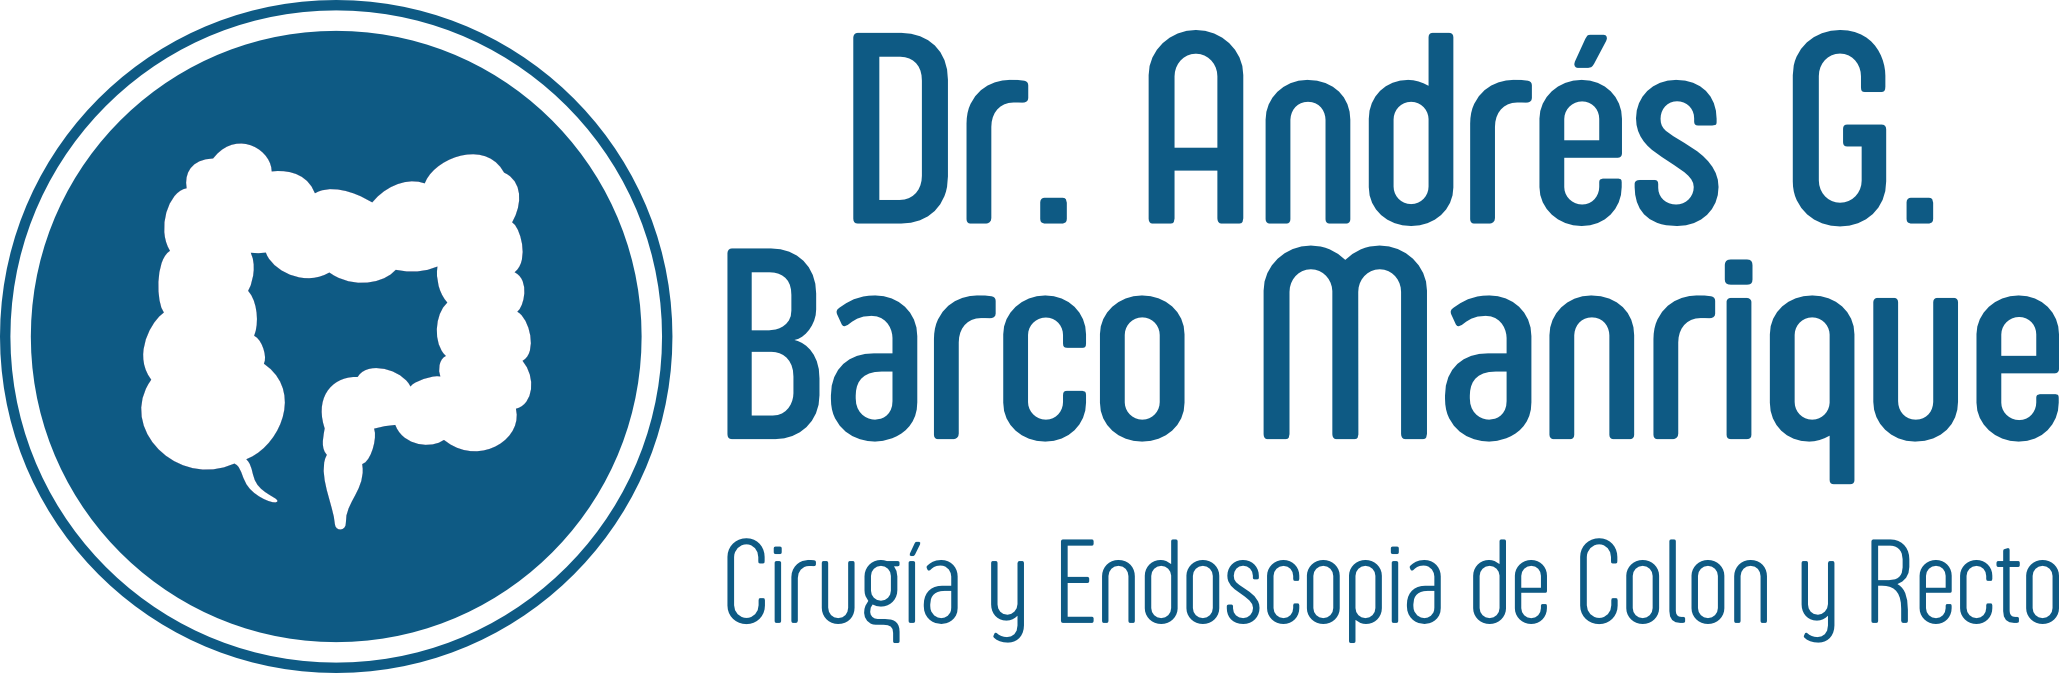 Dr. Andres Barco